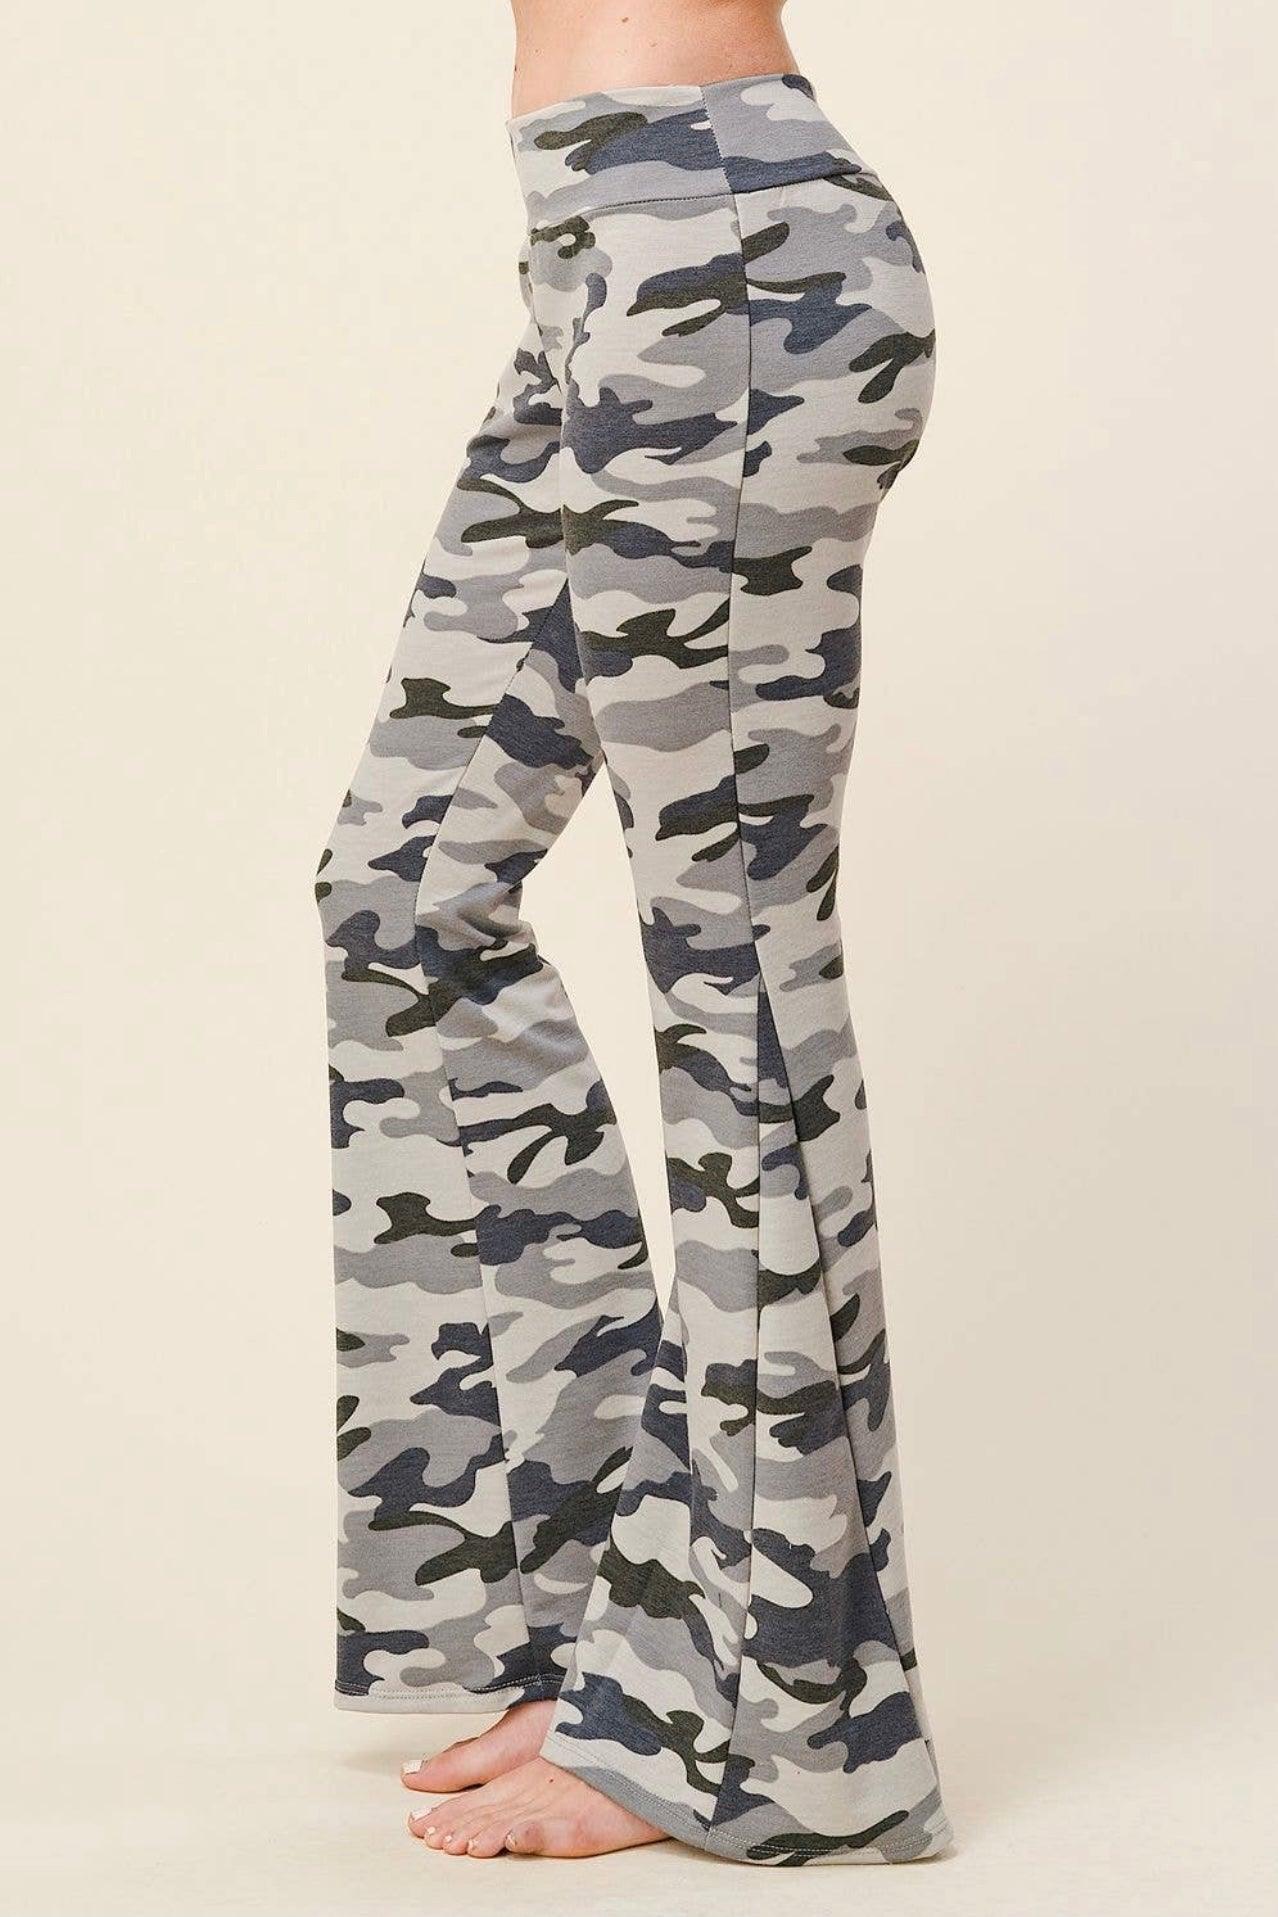 Casually Camo Flare Pants - Atomic Wildflower